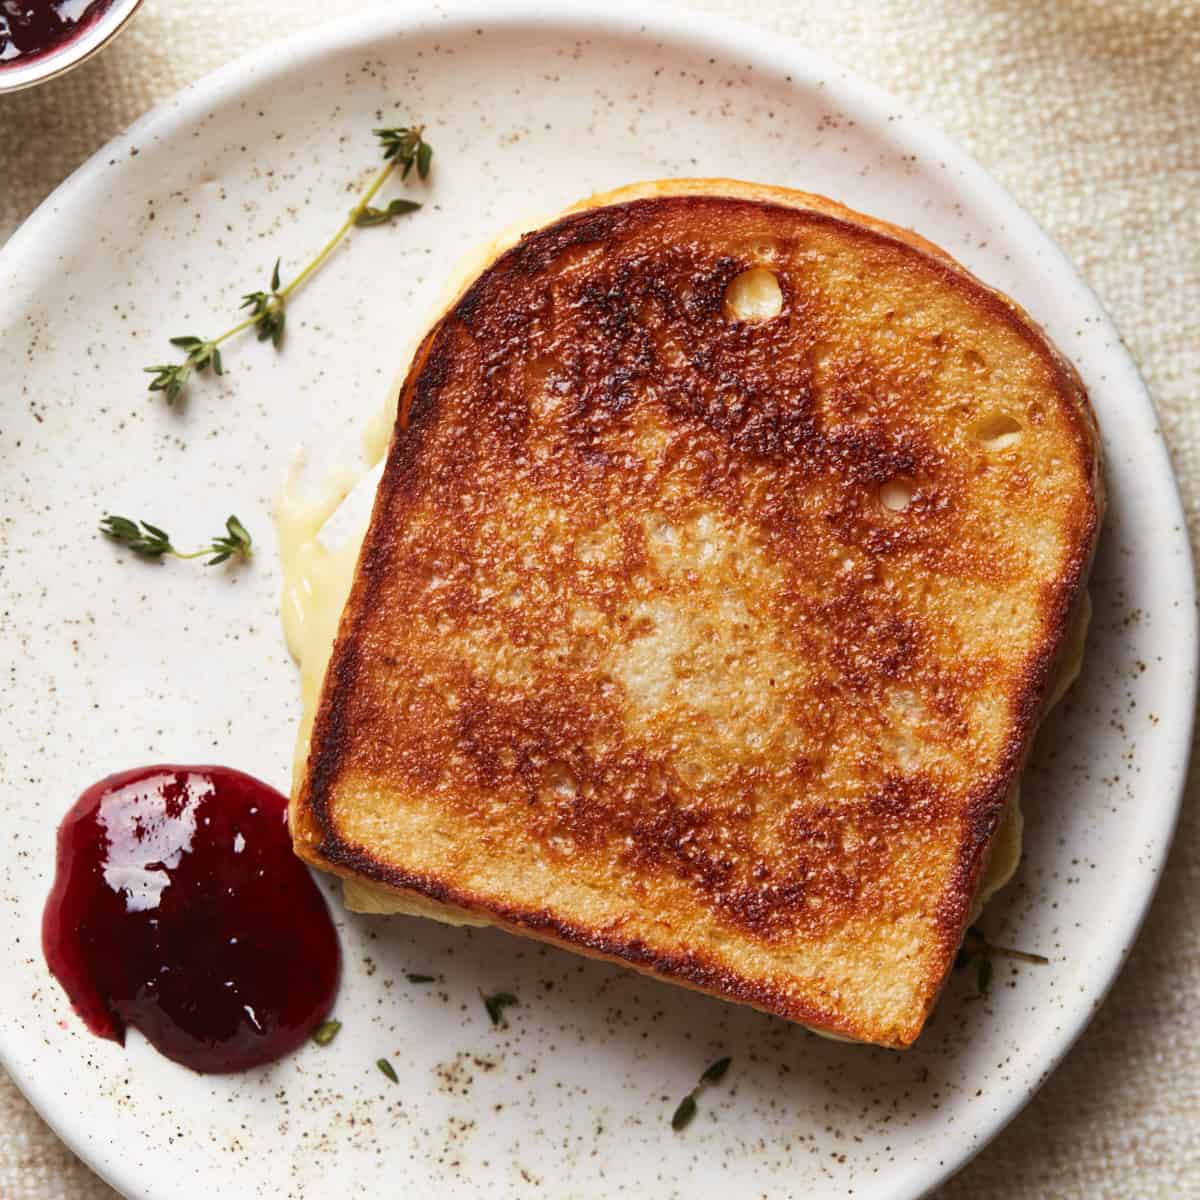 Grilled cheese sandwich with cranberry sauce and thyme on a dinner plate